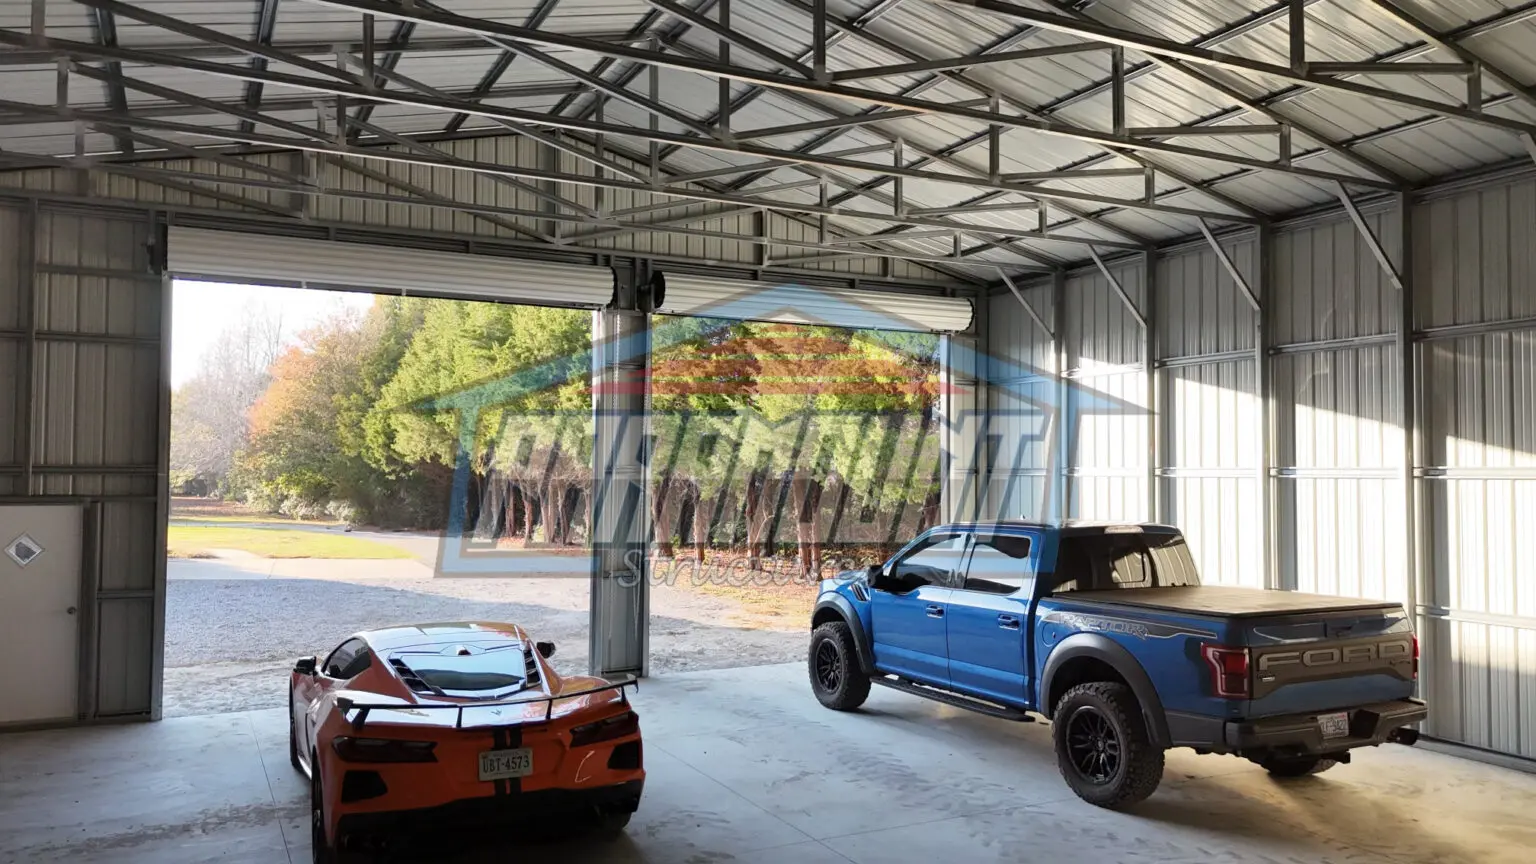 A blue truck and a blue sports car parked inside a building.